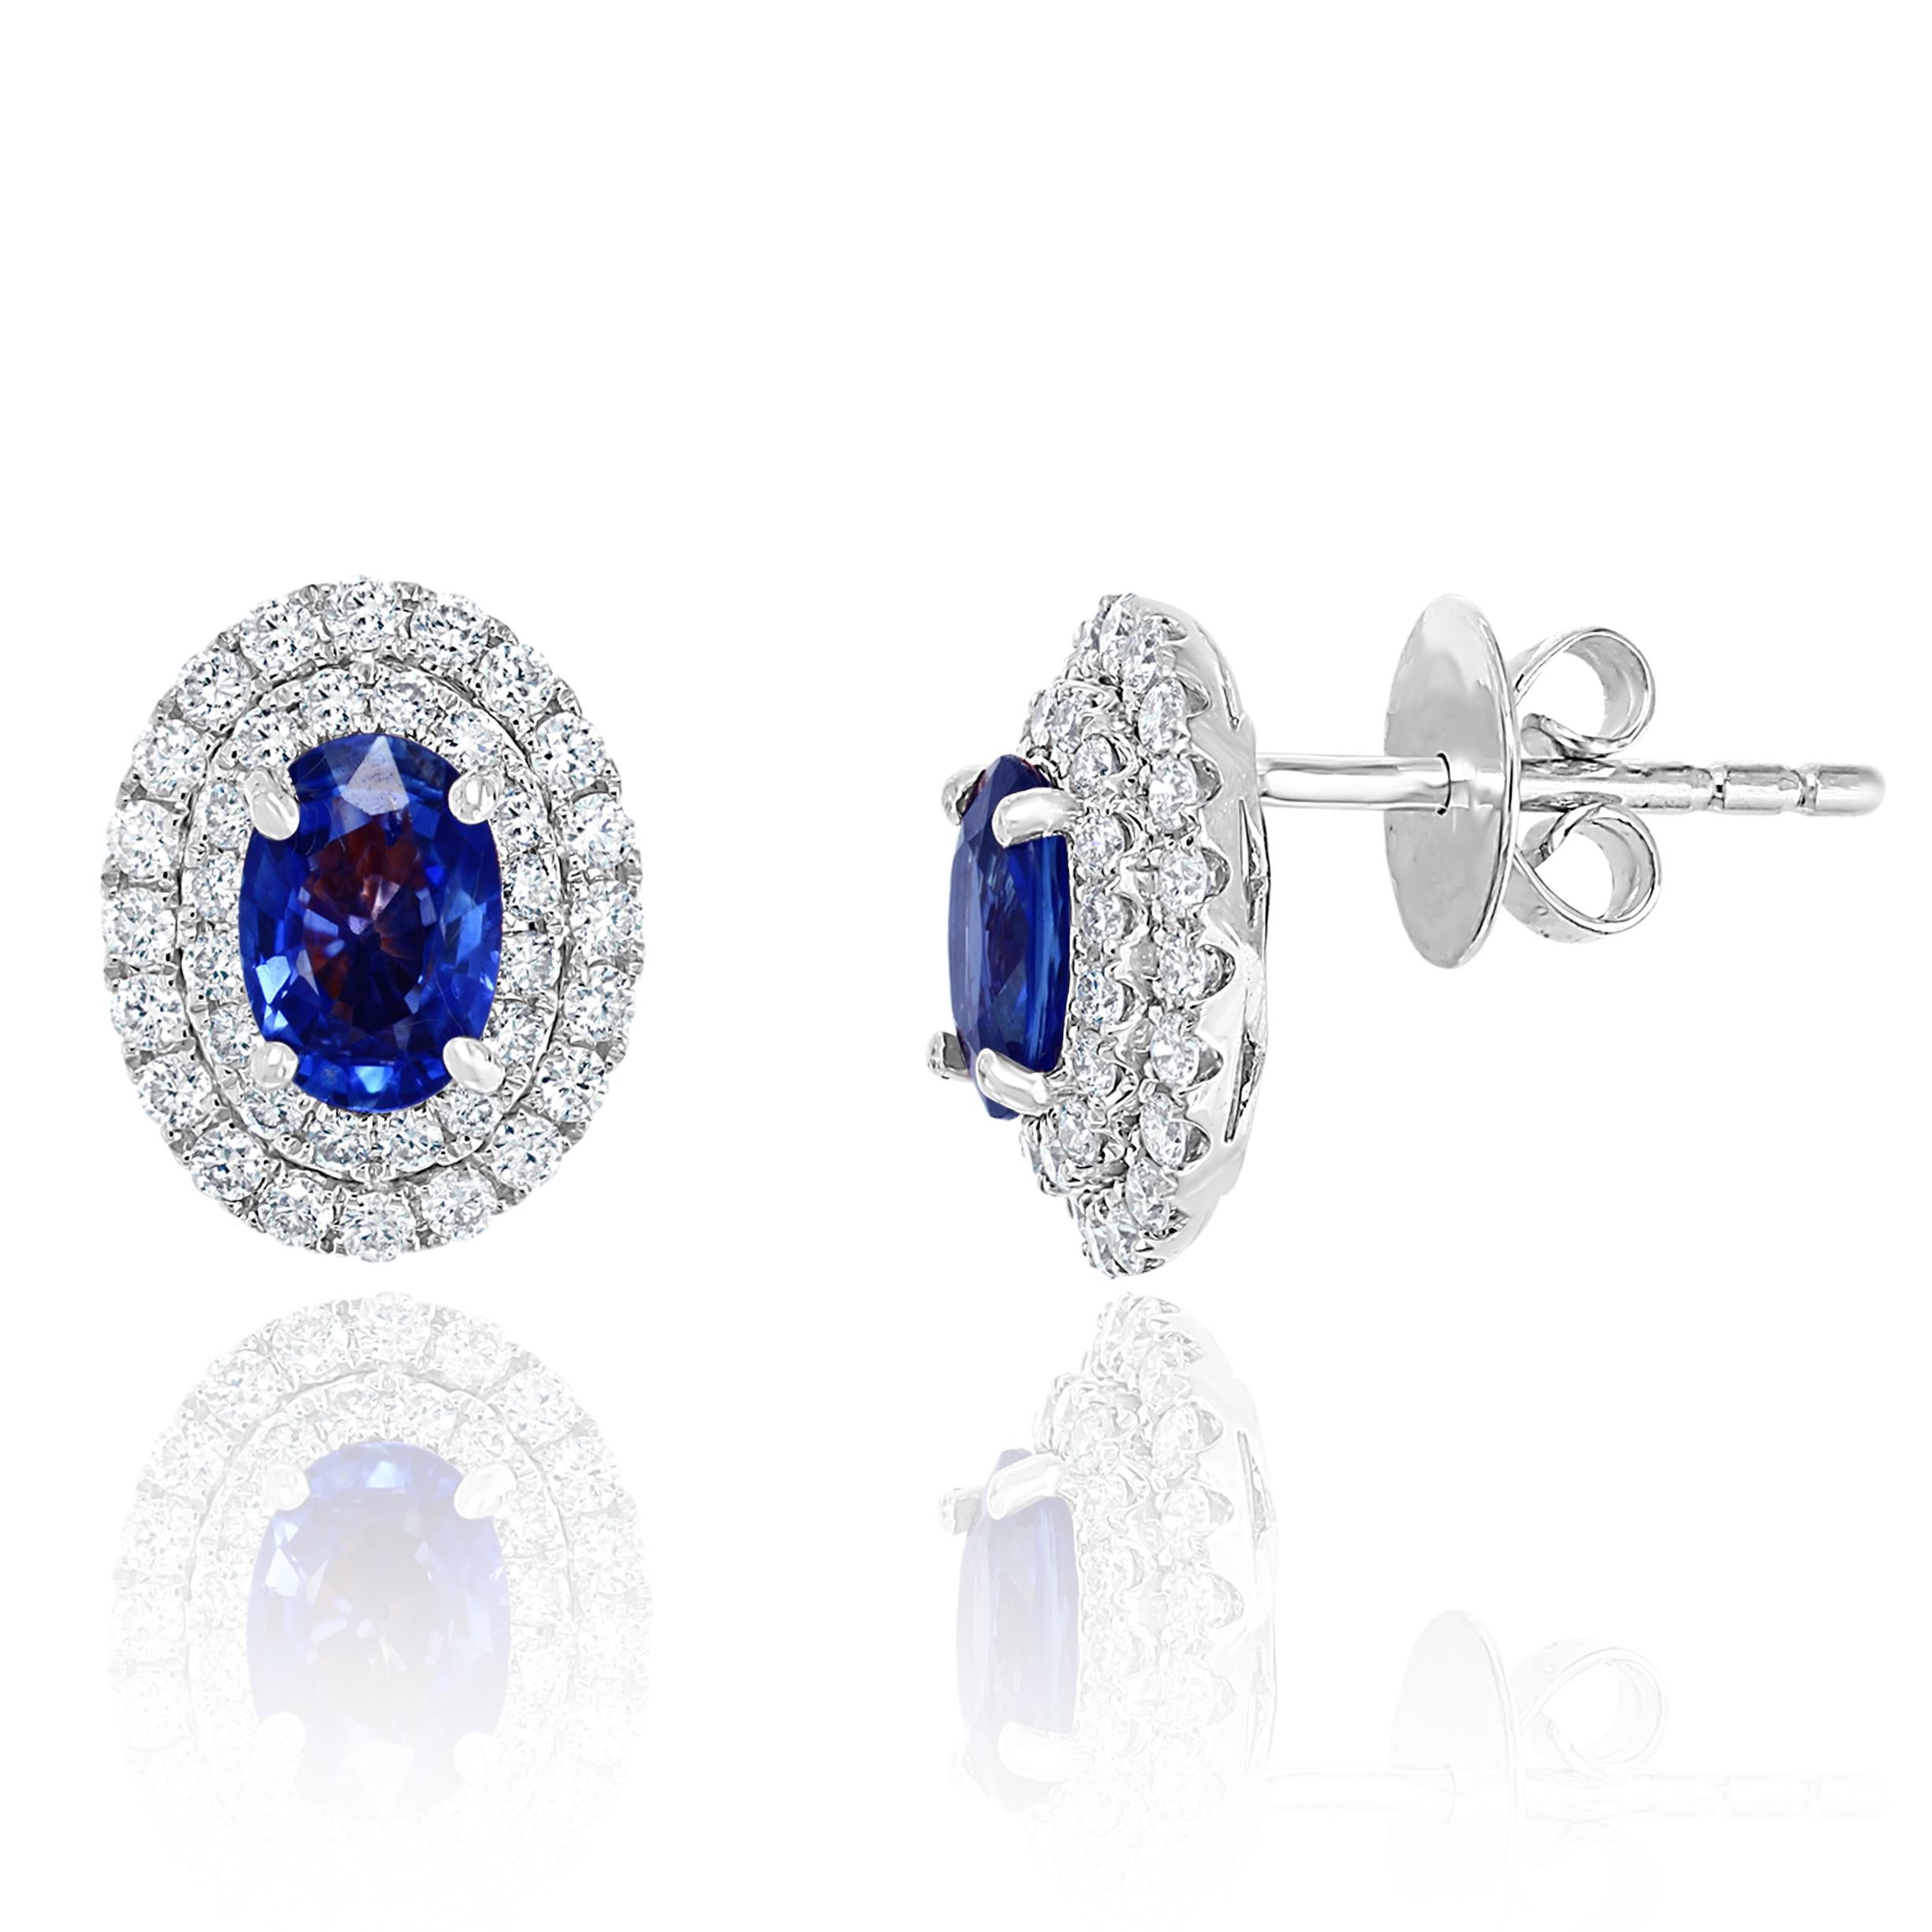 A simple pair of stud earrings showcasing 1.03 carats of oval cut blue sapphires, surrounded by a double row of 72 round brilliant diamonds weighing 0.48 carat. Made in 18 karats white gold.  